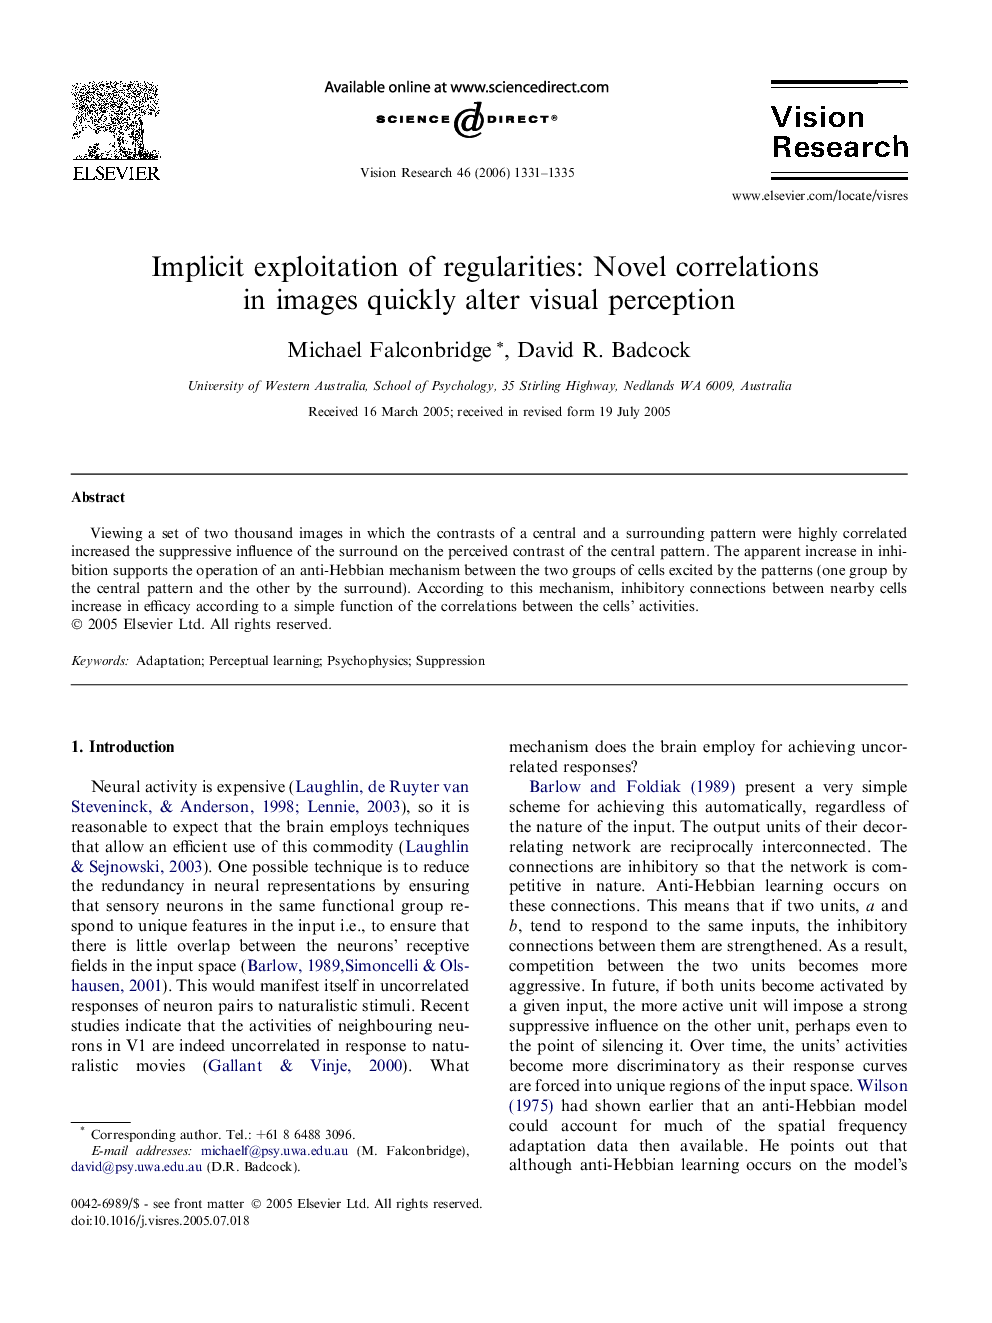 Implicit exploitation of regularities: Novel correlations in images quickly alter visual perception